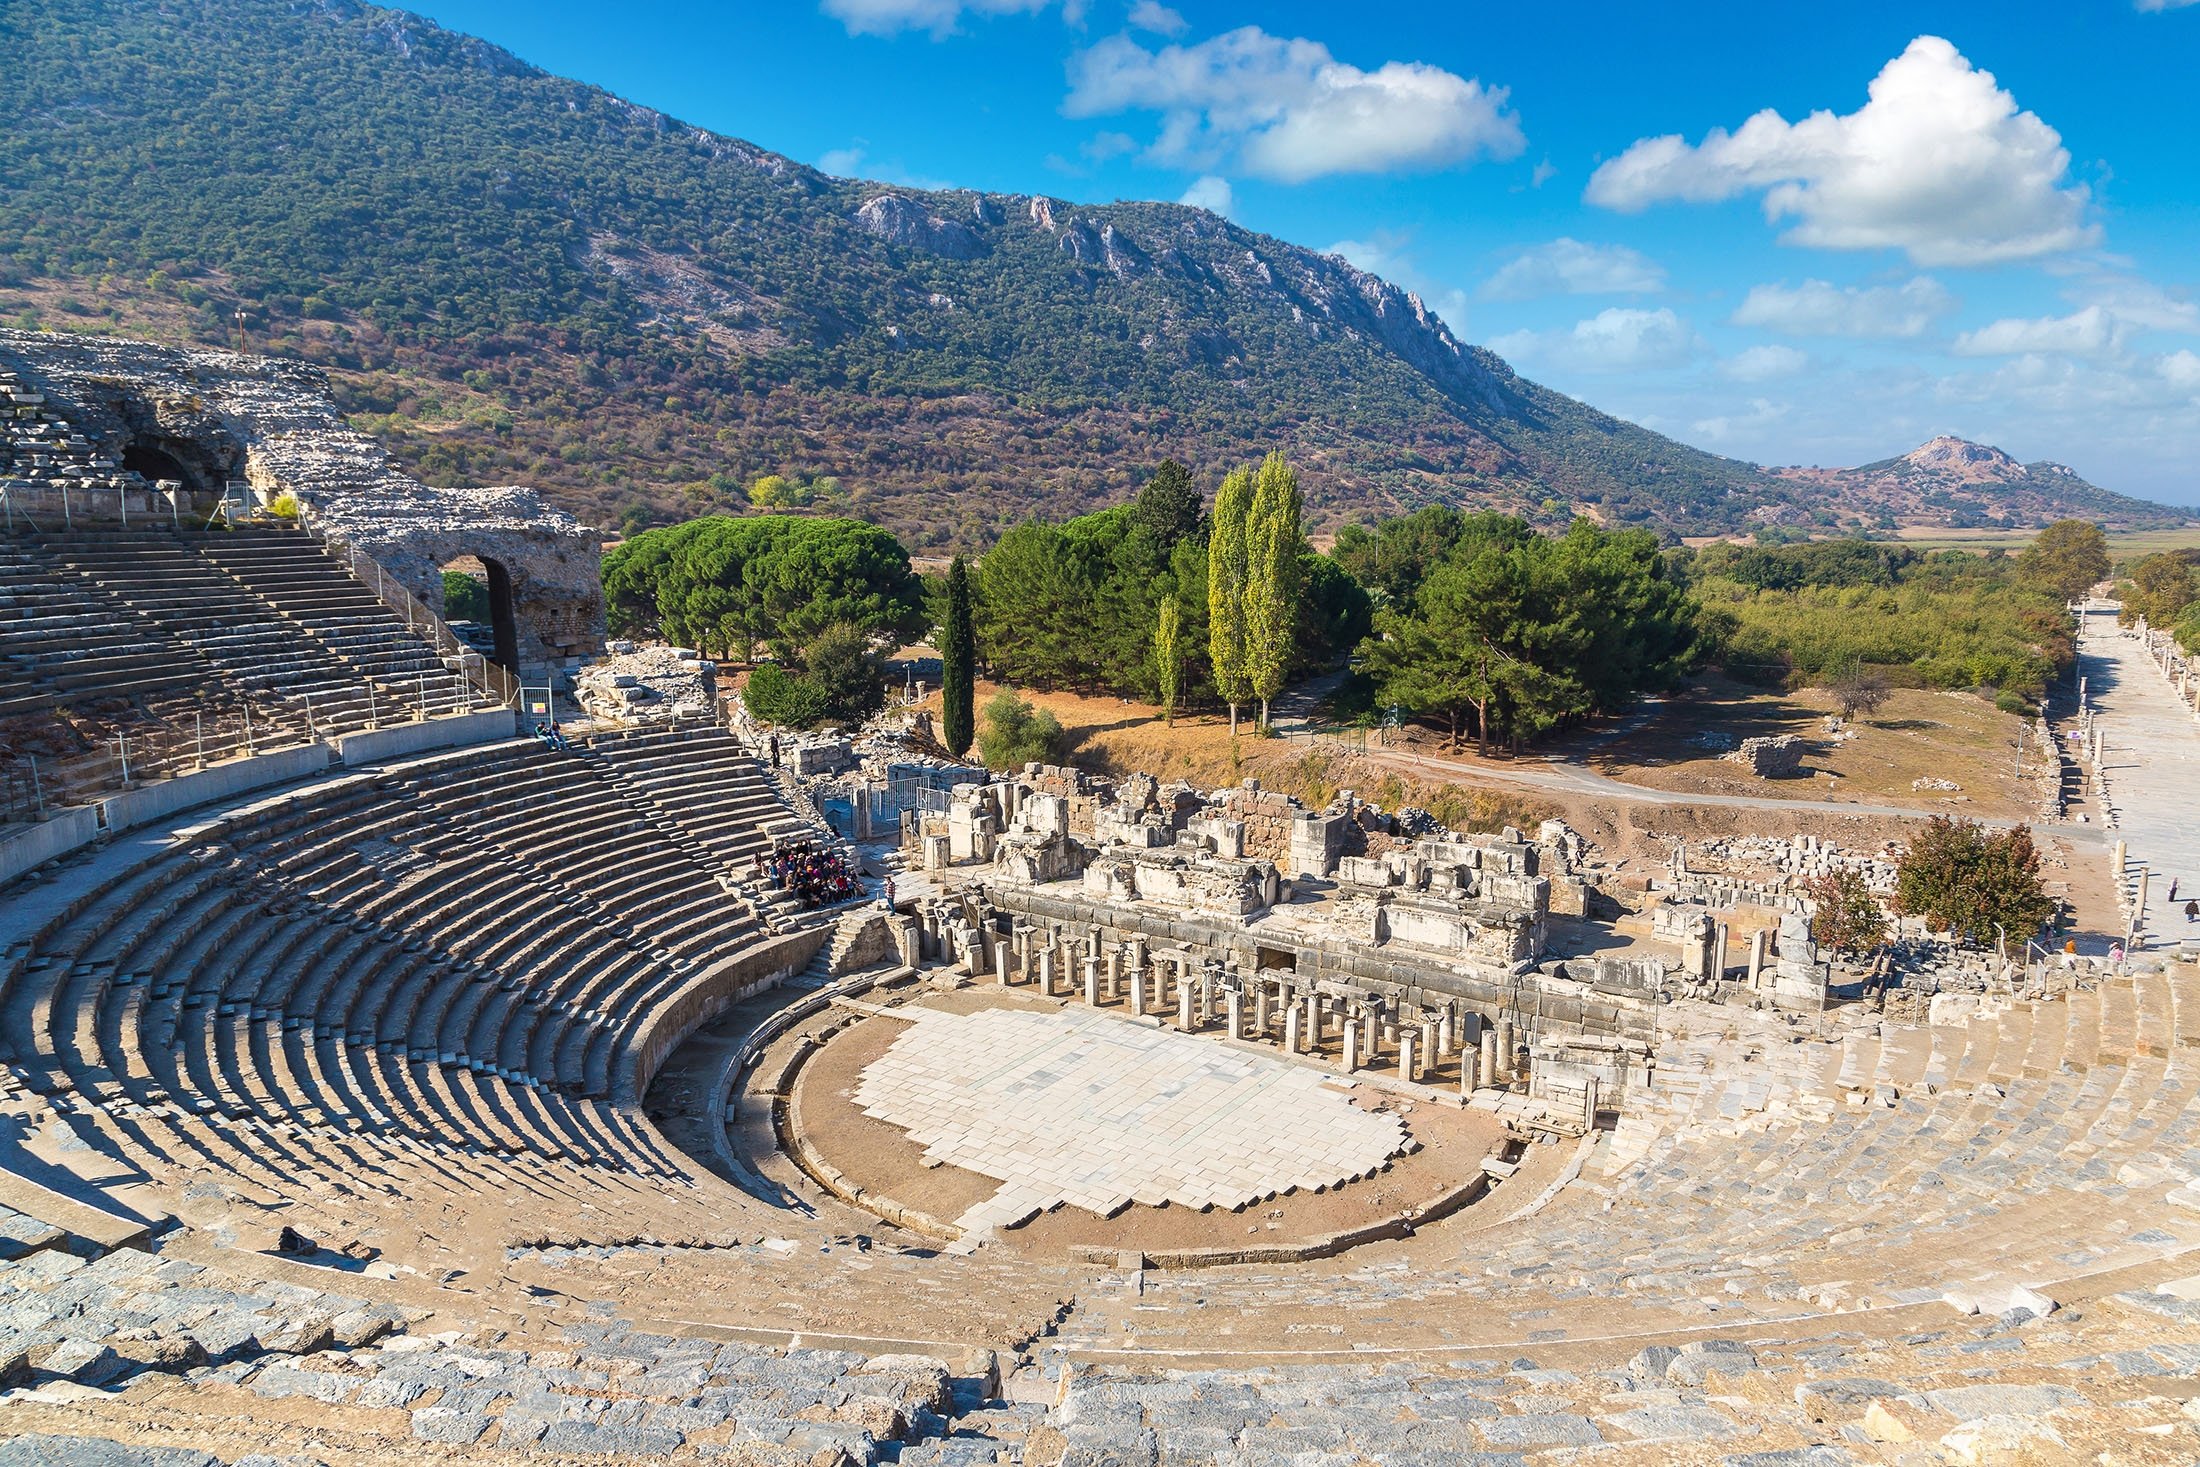 The antique theater of Turkey’s most spectacularly preserved ancient city of Ephesus provides a once-in-a-lifetime experience when hosting performances. (Shutterstock Photo)